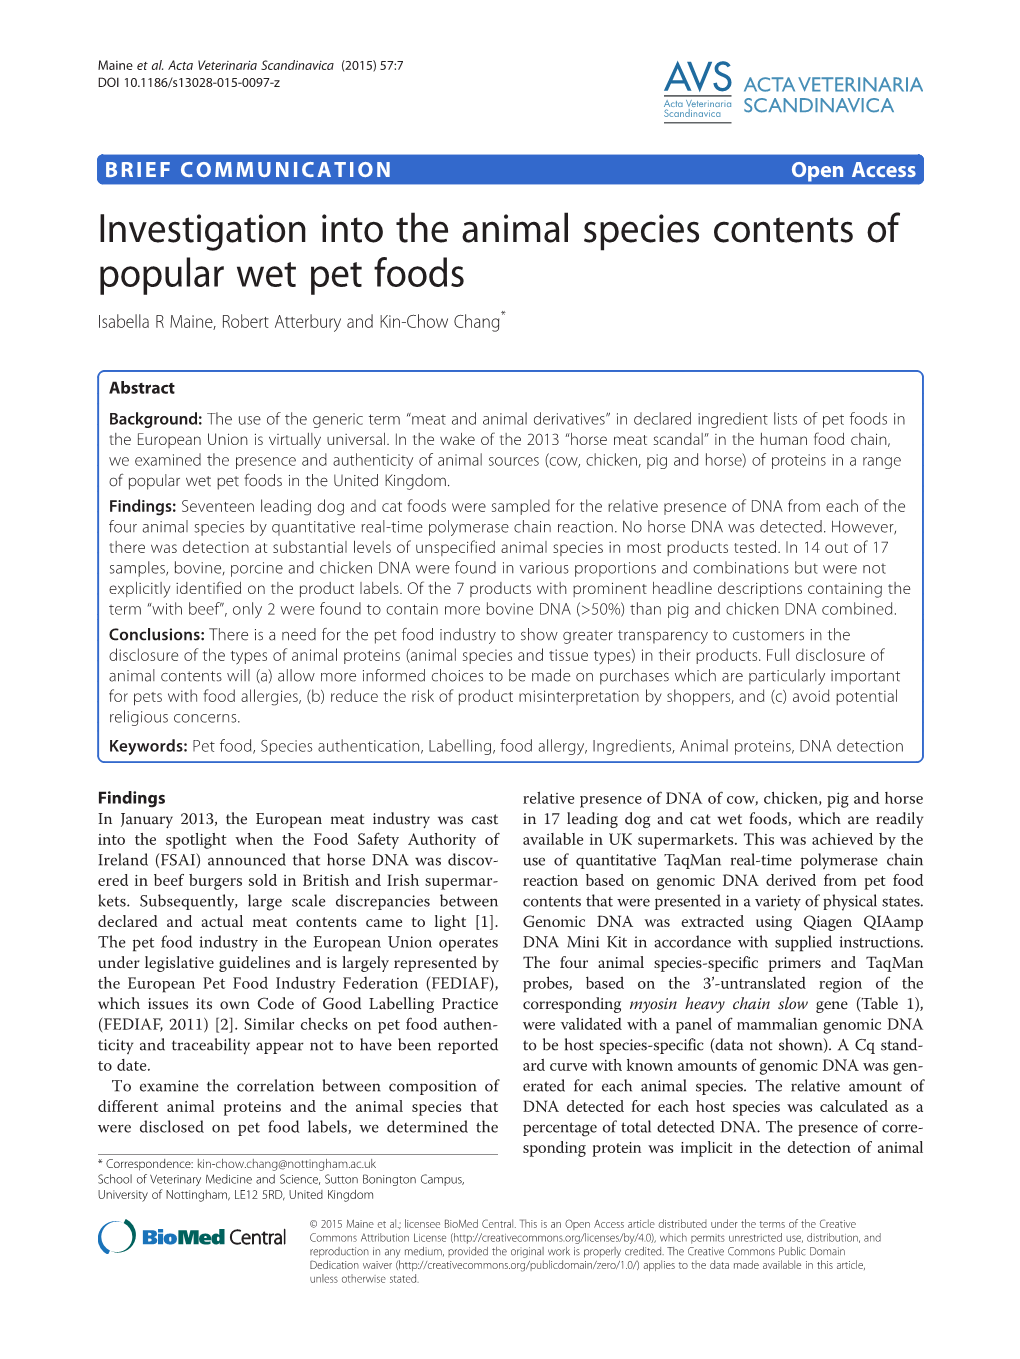 Investigation Into the Animal Species Contents of Popular Wet Pet Foods Isabella R Maine, Robert Atterbury and Kin-Chow Chang*